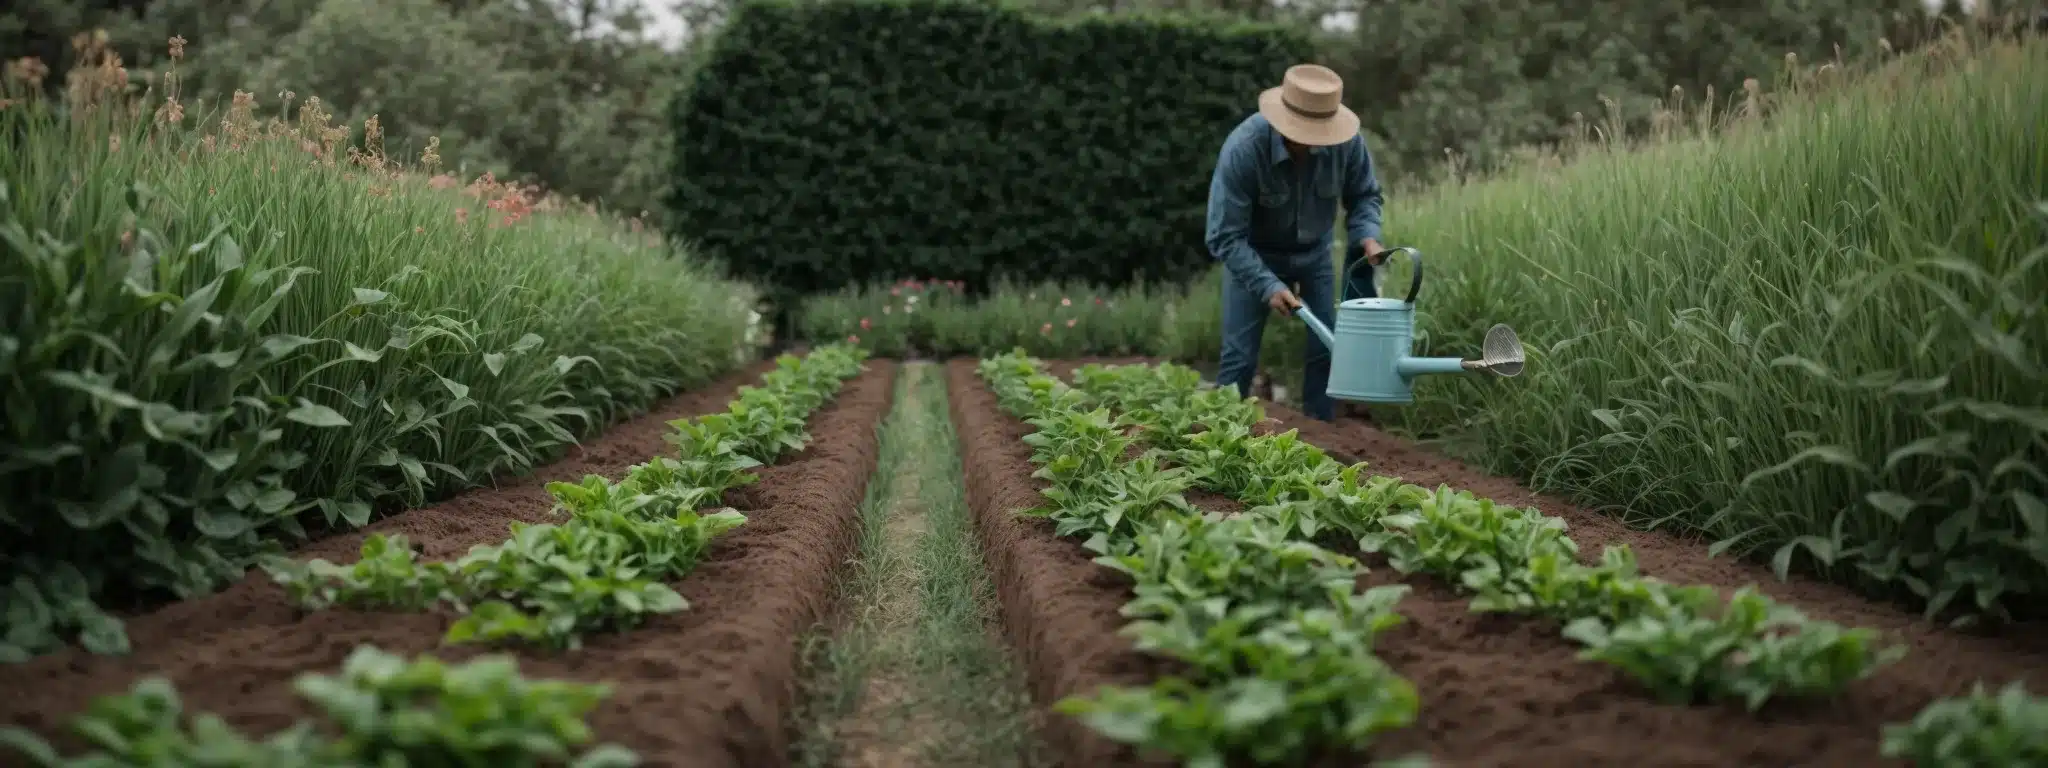 A Gardener Watering A Row Of Young Plants With A Watering Can In A Tranquil Garden.